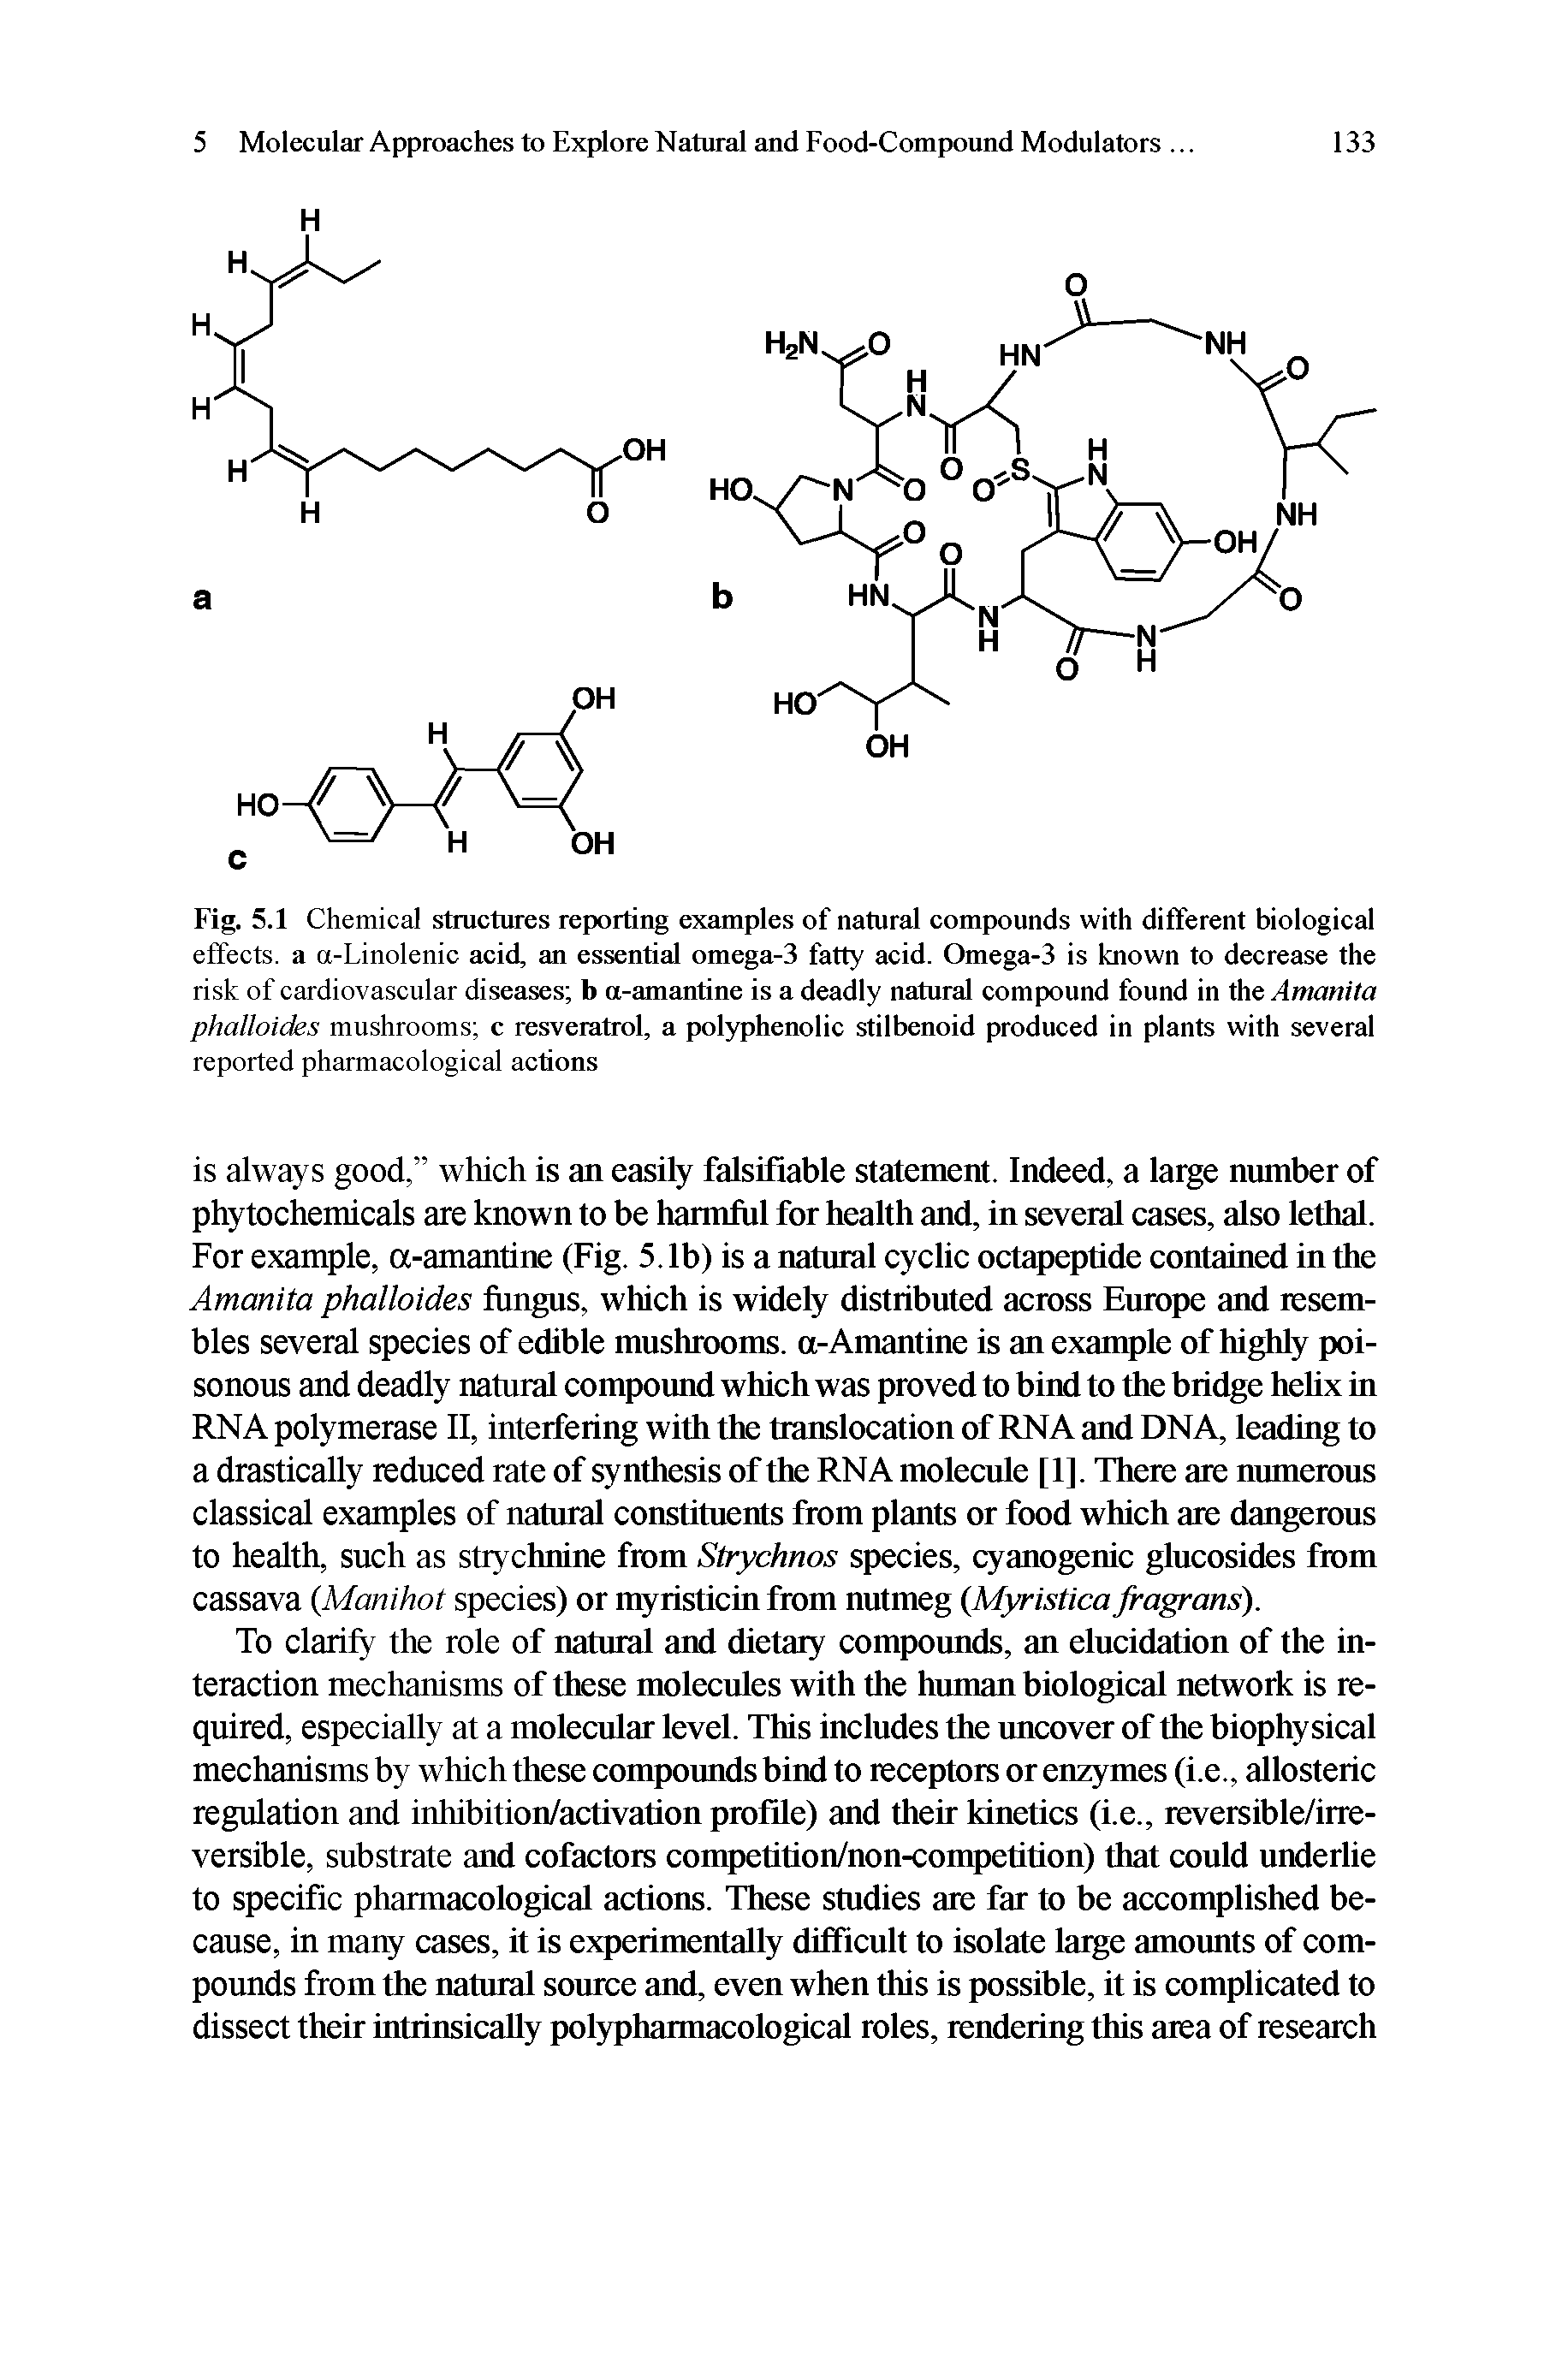 Fig. 5.1 Chemical structures reporting examples of natural compounds with different biological effects, a a-Linolenic acid, an essential omega-3 fatty acid. Omega-3 is known to decrease the risk of cardiovascular diseases b a-amantine is a deadly natural compound found in the Amanita phalloides mushrooms c resveratrol, a polyphenolic stilbenoid produced in plants with several reported pharmacological actions...